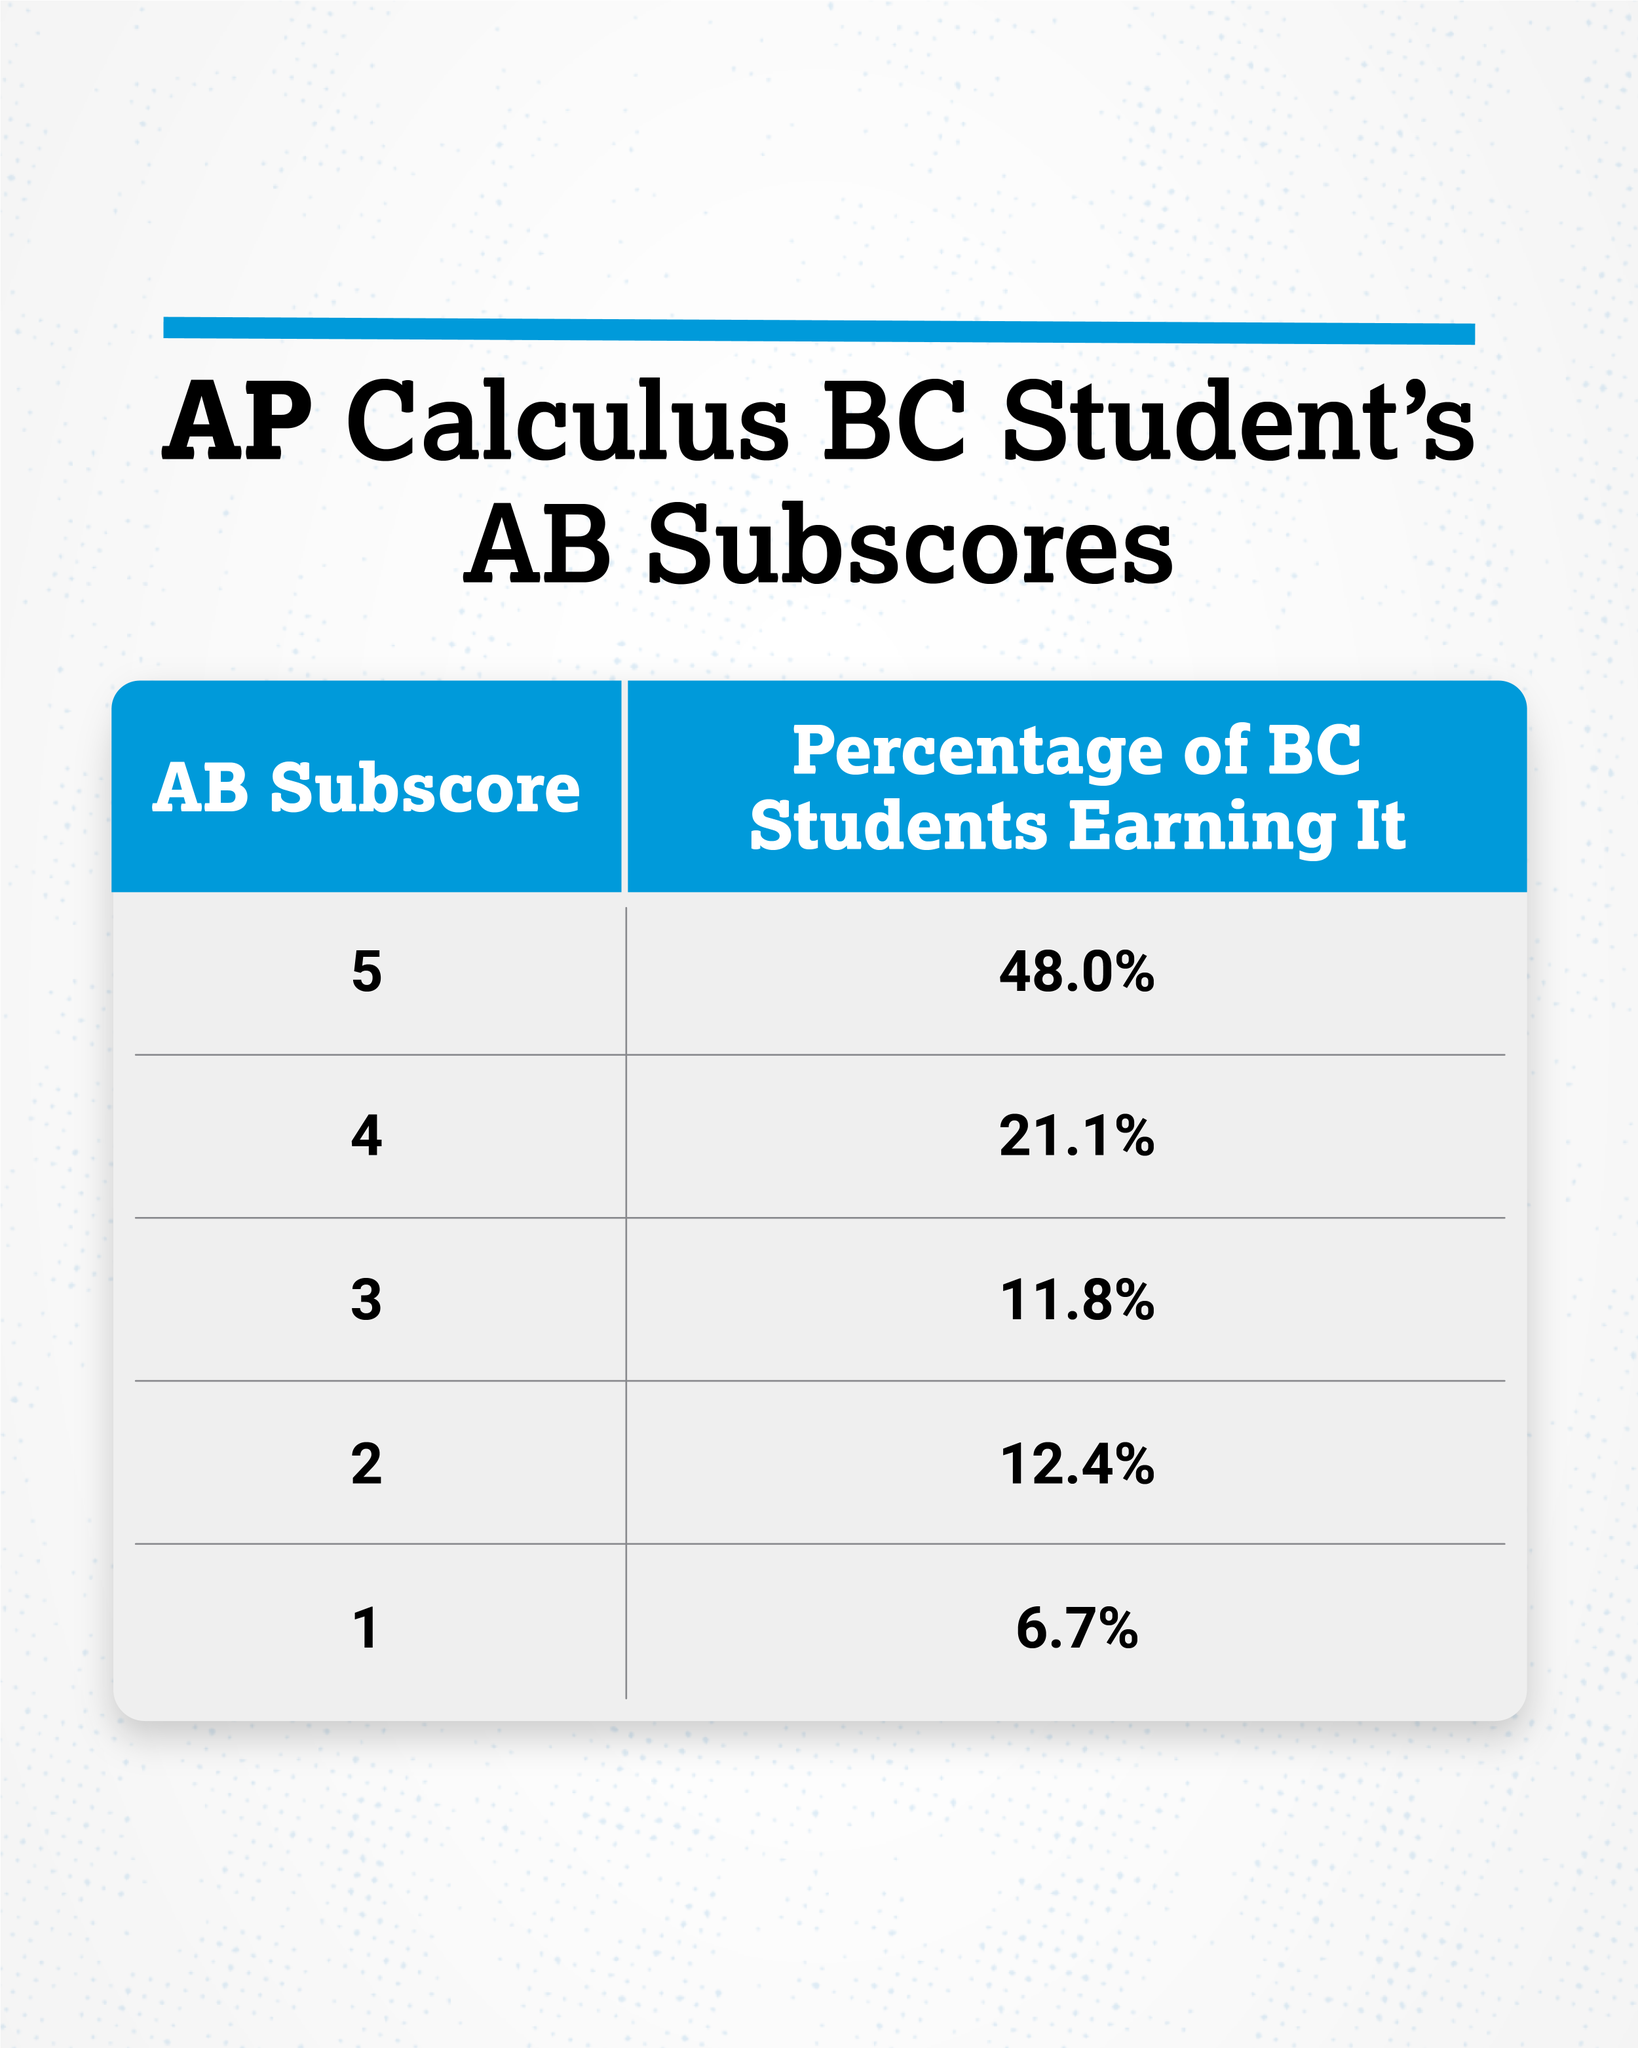 AB Subscore